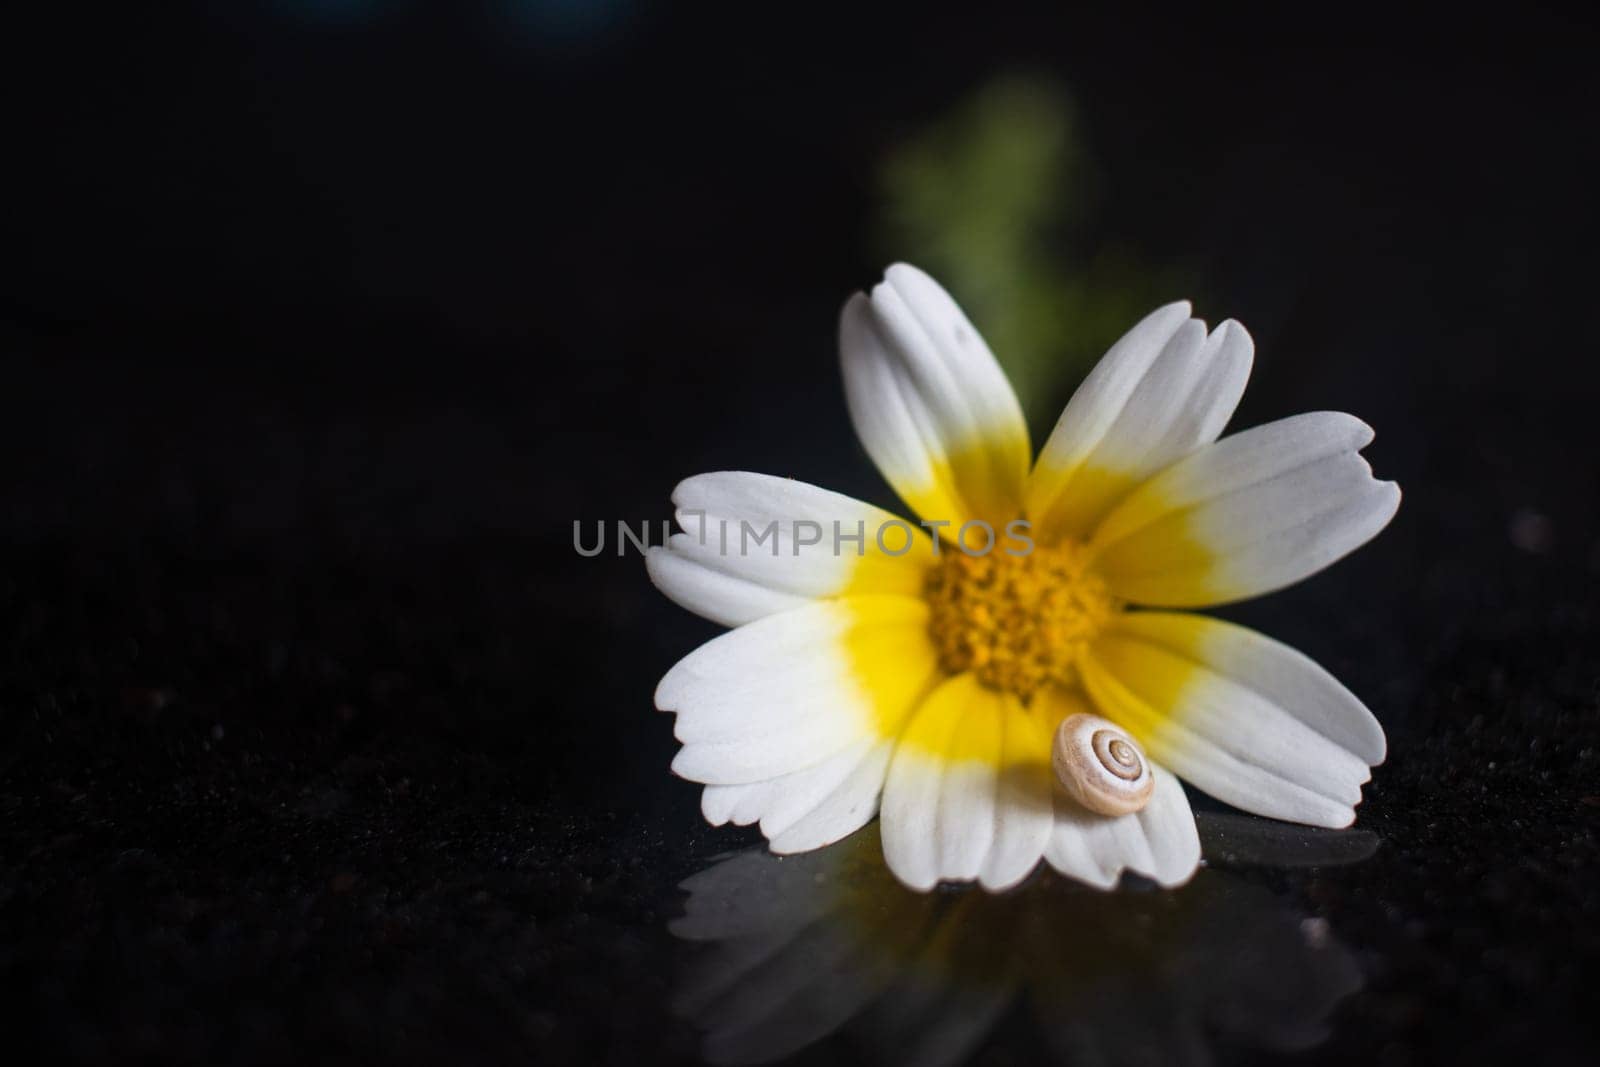 White and yellow daisy with a snail, in a still life photo by senkaya